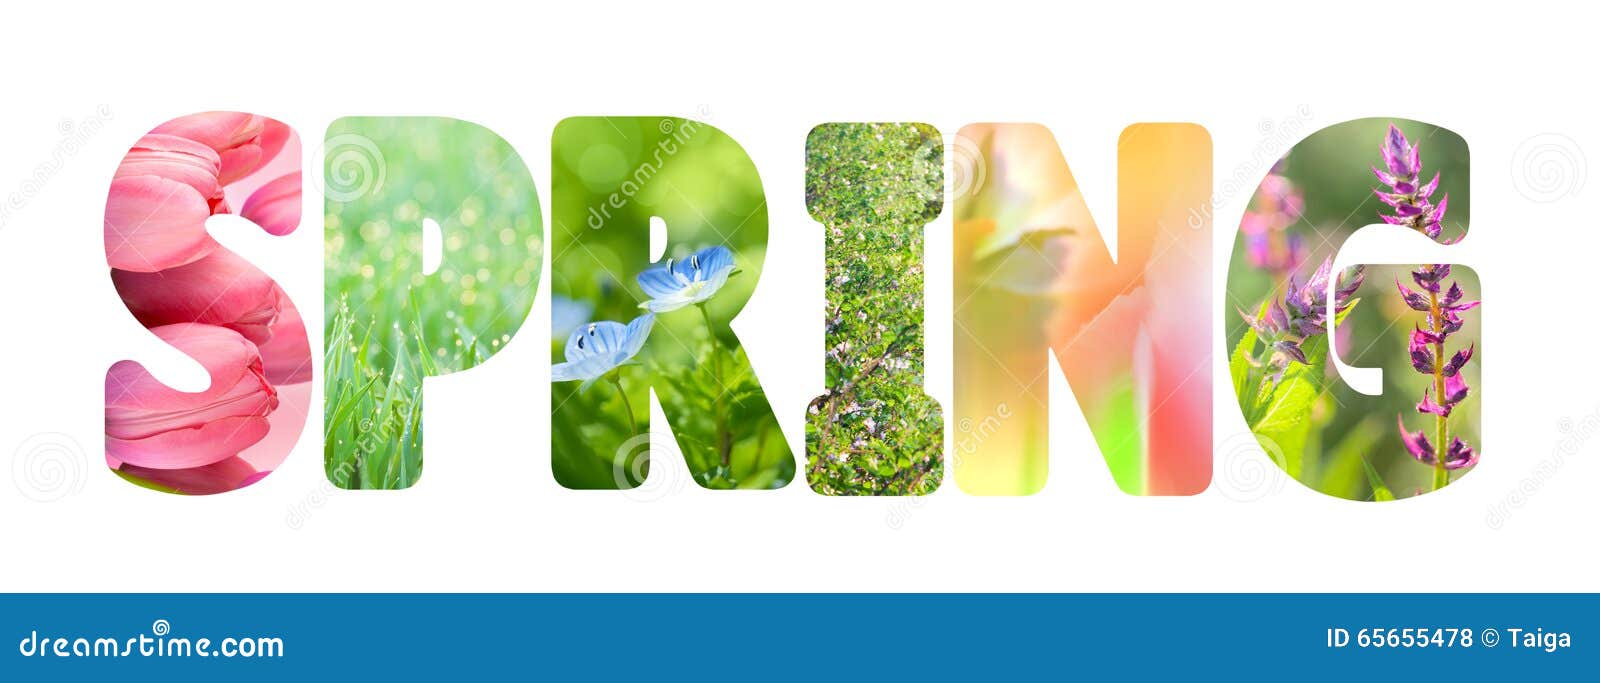 word spring with colorful nature photos inside the letters